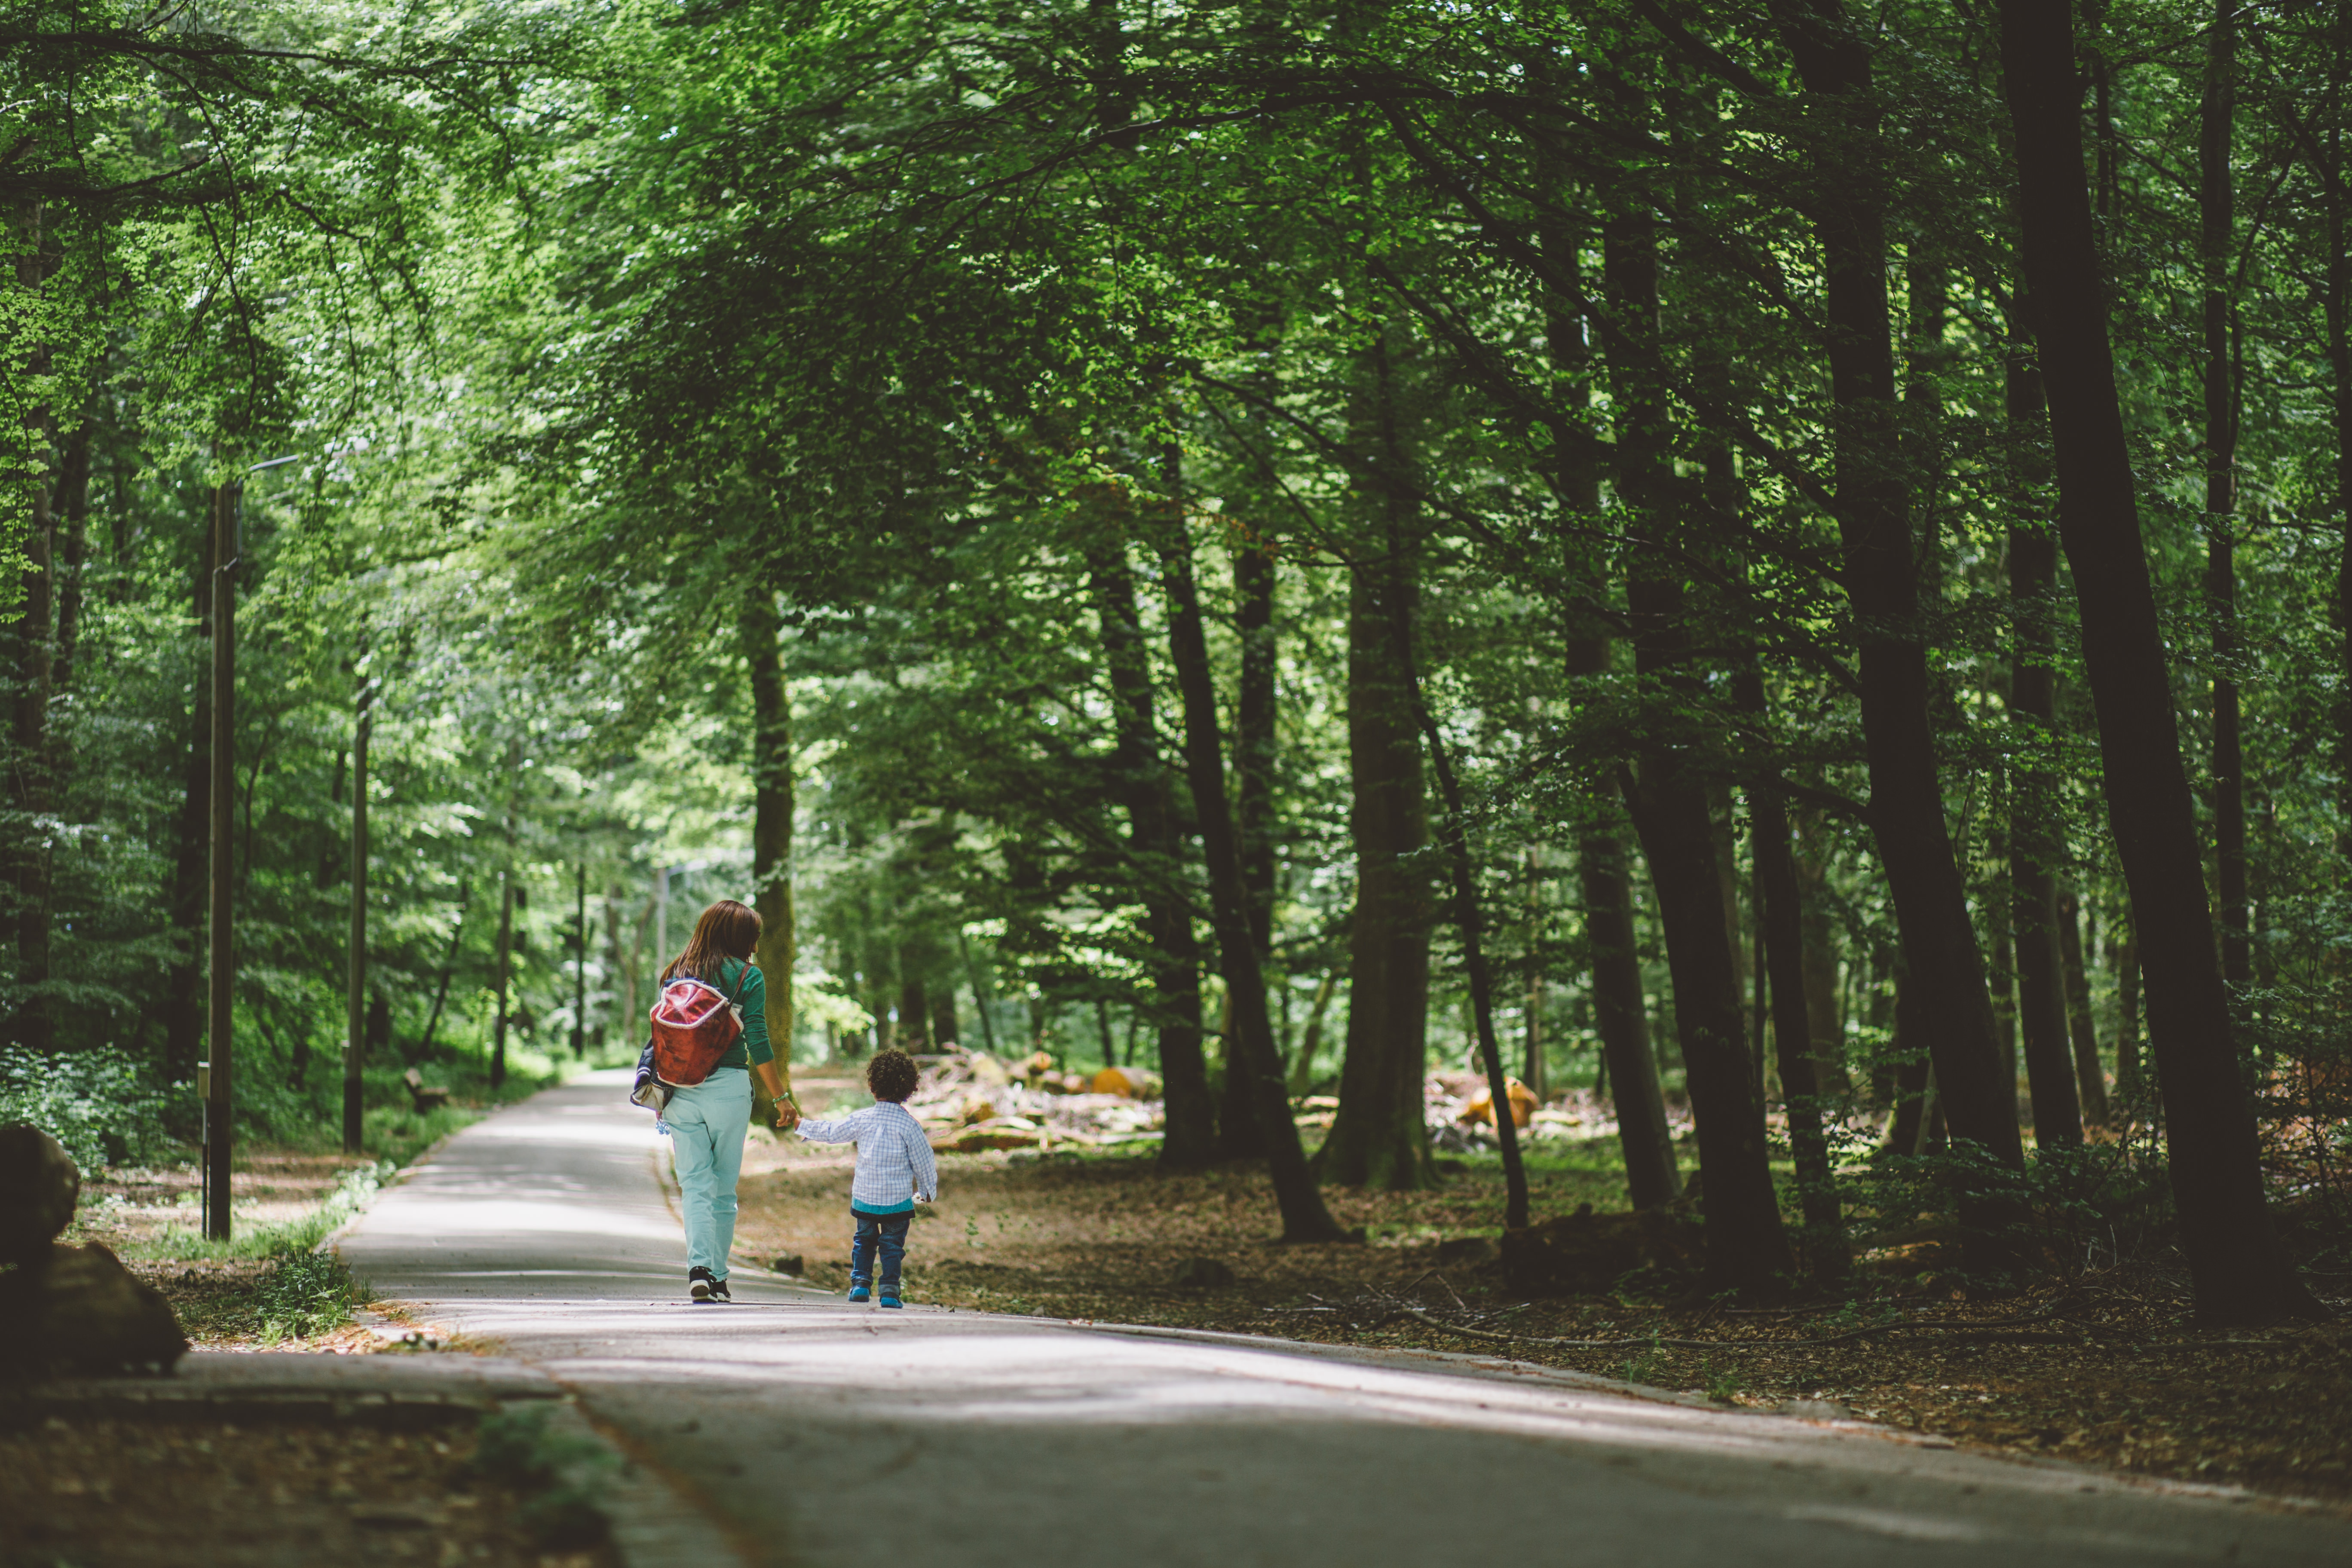 Mother and child walk hand-in-hand through a forested park.